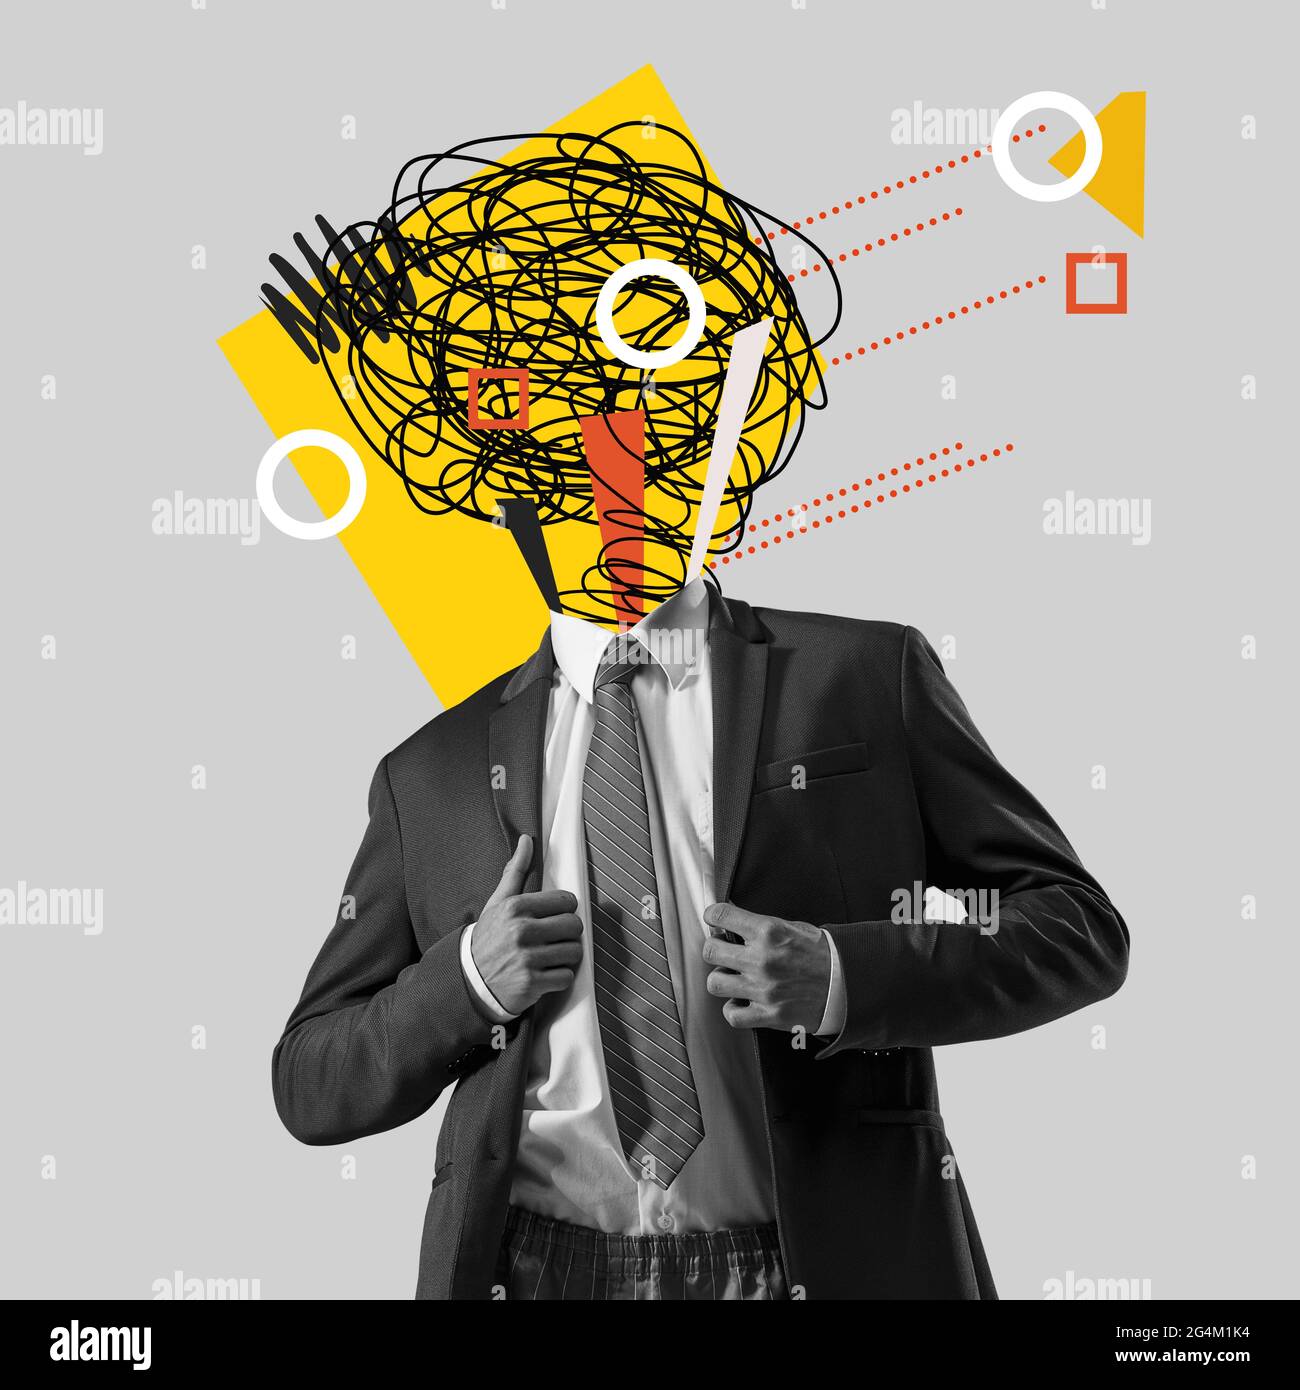 Chaos in man's head and hurricane of thoughts. Modern design, contemporary art collage. Inspiration, idea, trendy urban magazine style. Line art Stock Photo